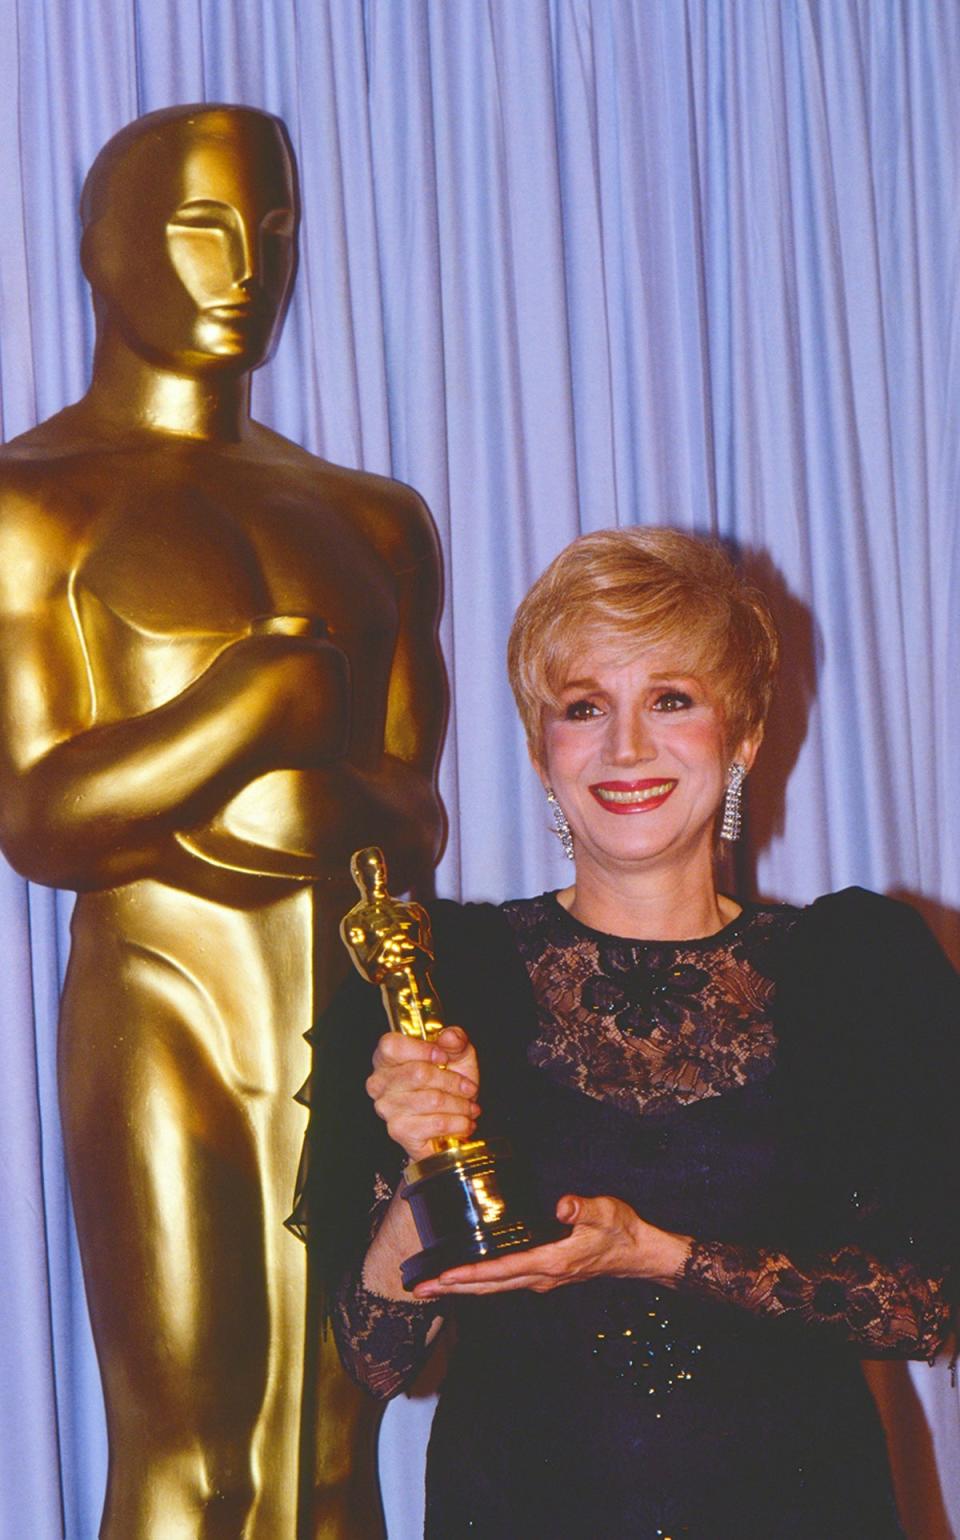 Olympia Dukakis with her (soon to be stolen) Oscar in 1988 (Elisa Leonelli/Shutterstock)